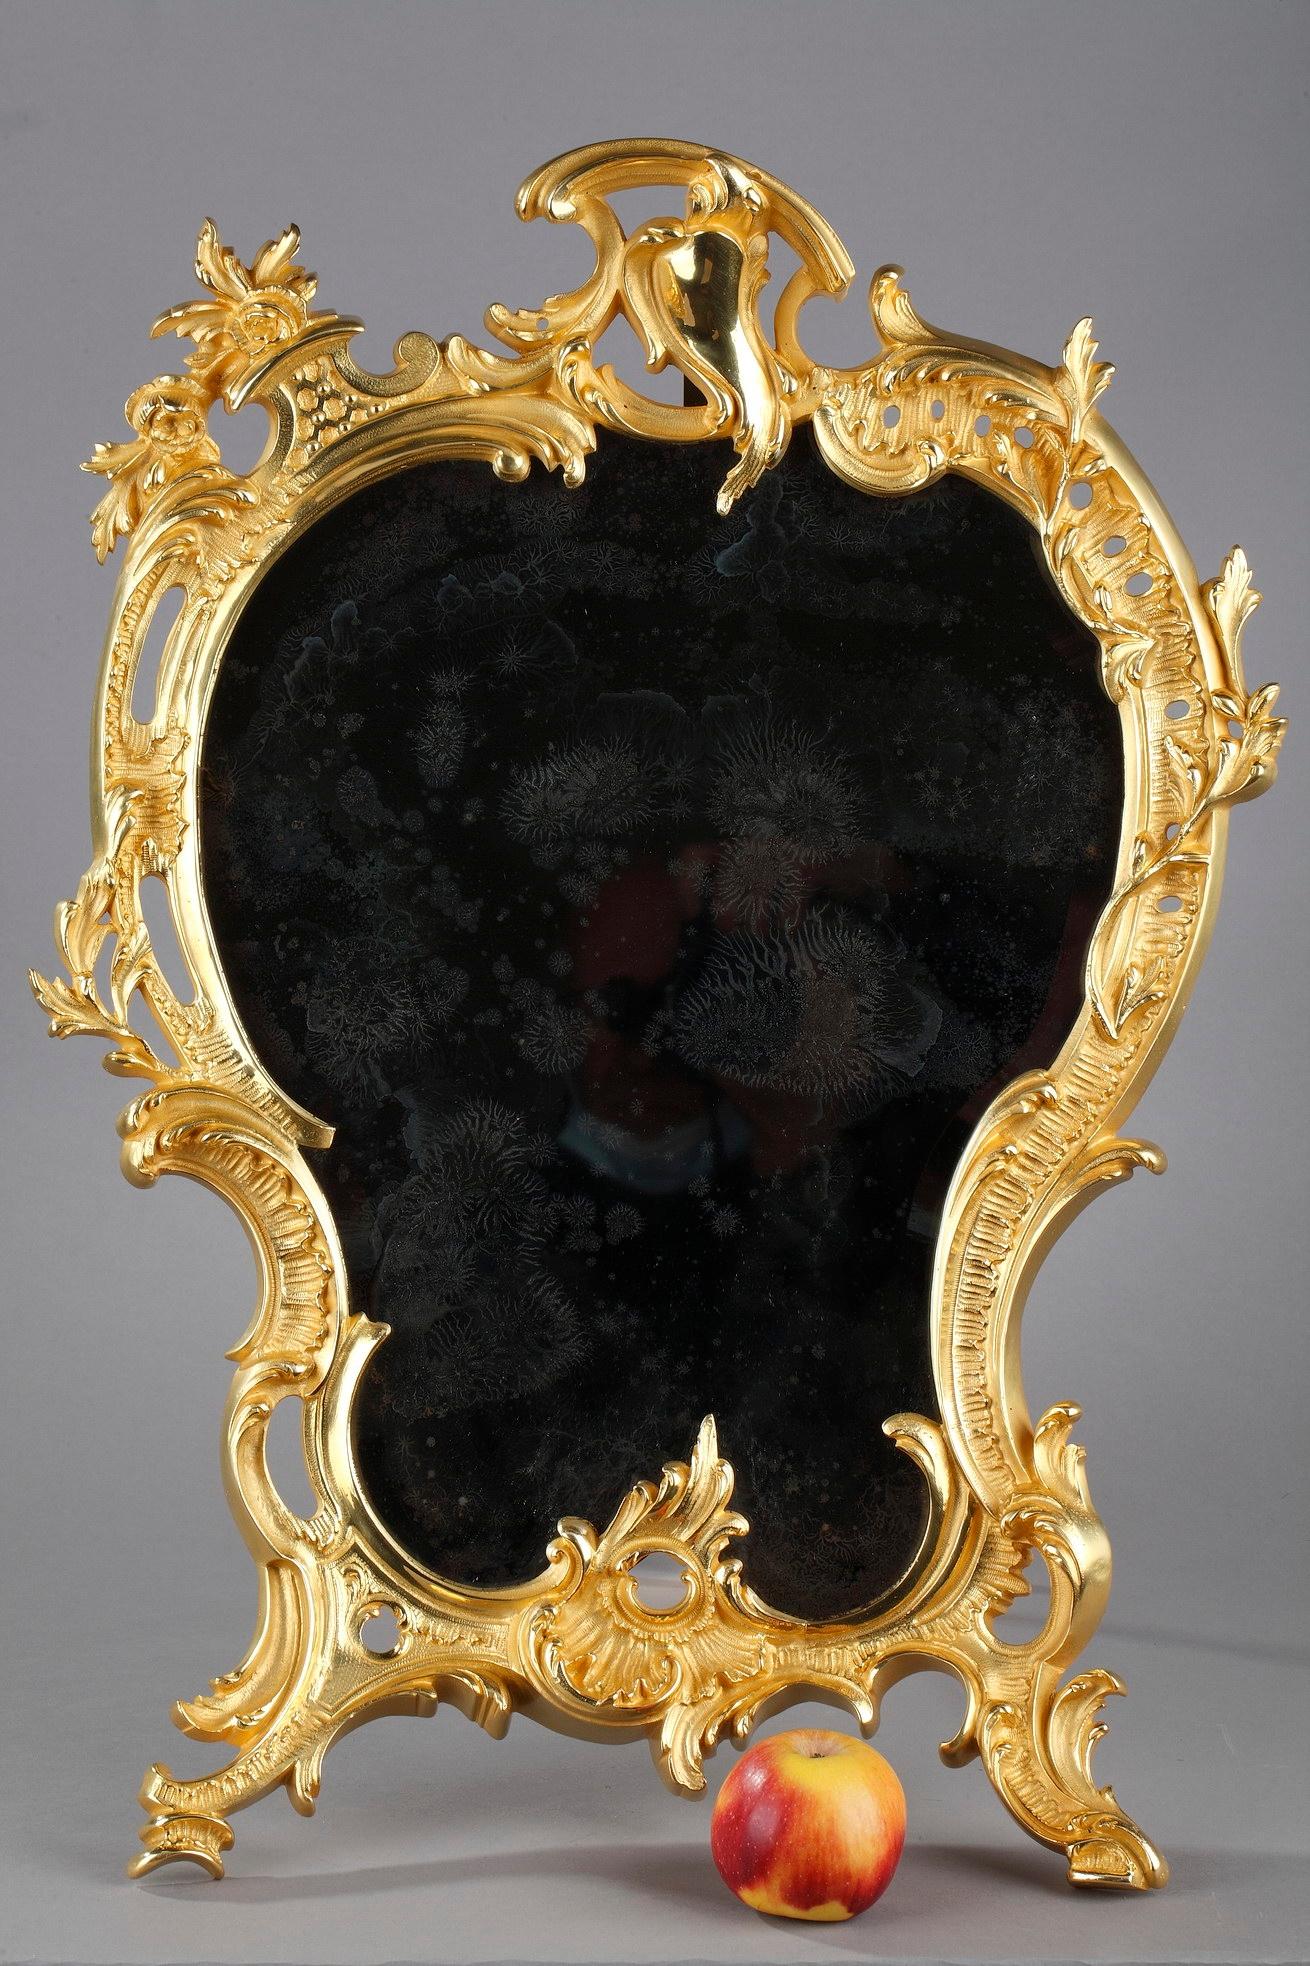 This ornamental Louis XV style mirror glass captures the grace of the Rococo age. Crafted of gilt bronze, the frame features sweeping, heavy scrolls and acanthus with floral details. A singing bird adorns the top of the golden frame. The back part